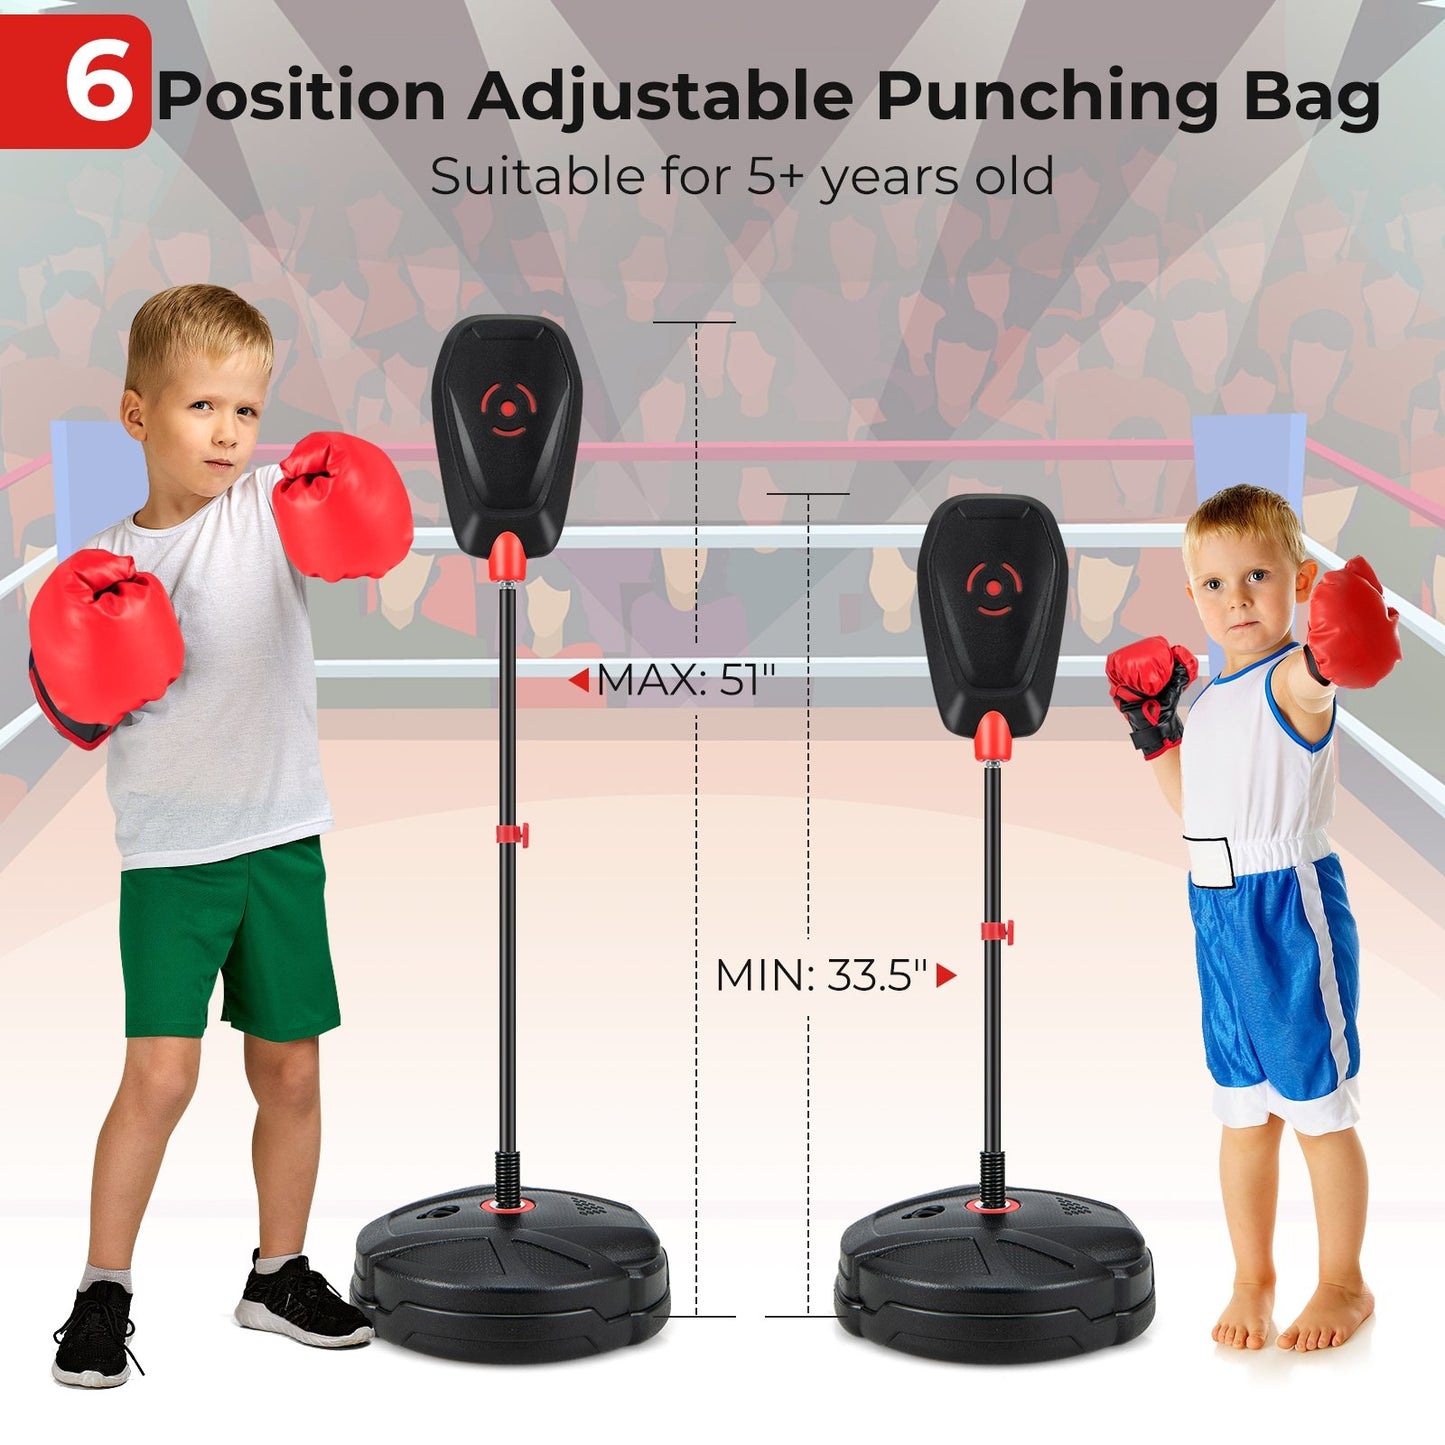 Inflation-Free Boxing set with Punching Bag and Boxing Gloves Quick Rebound Design for 5+ Years Old Kids